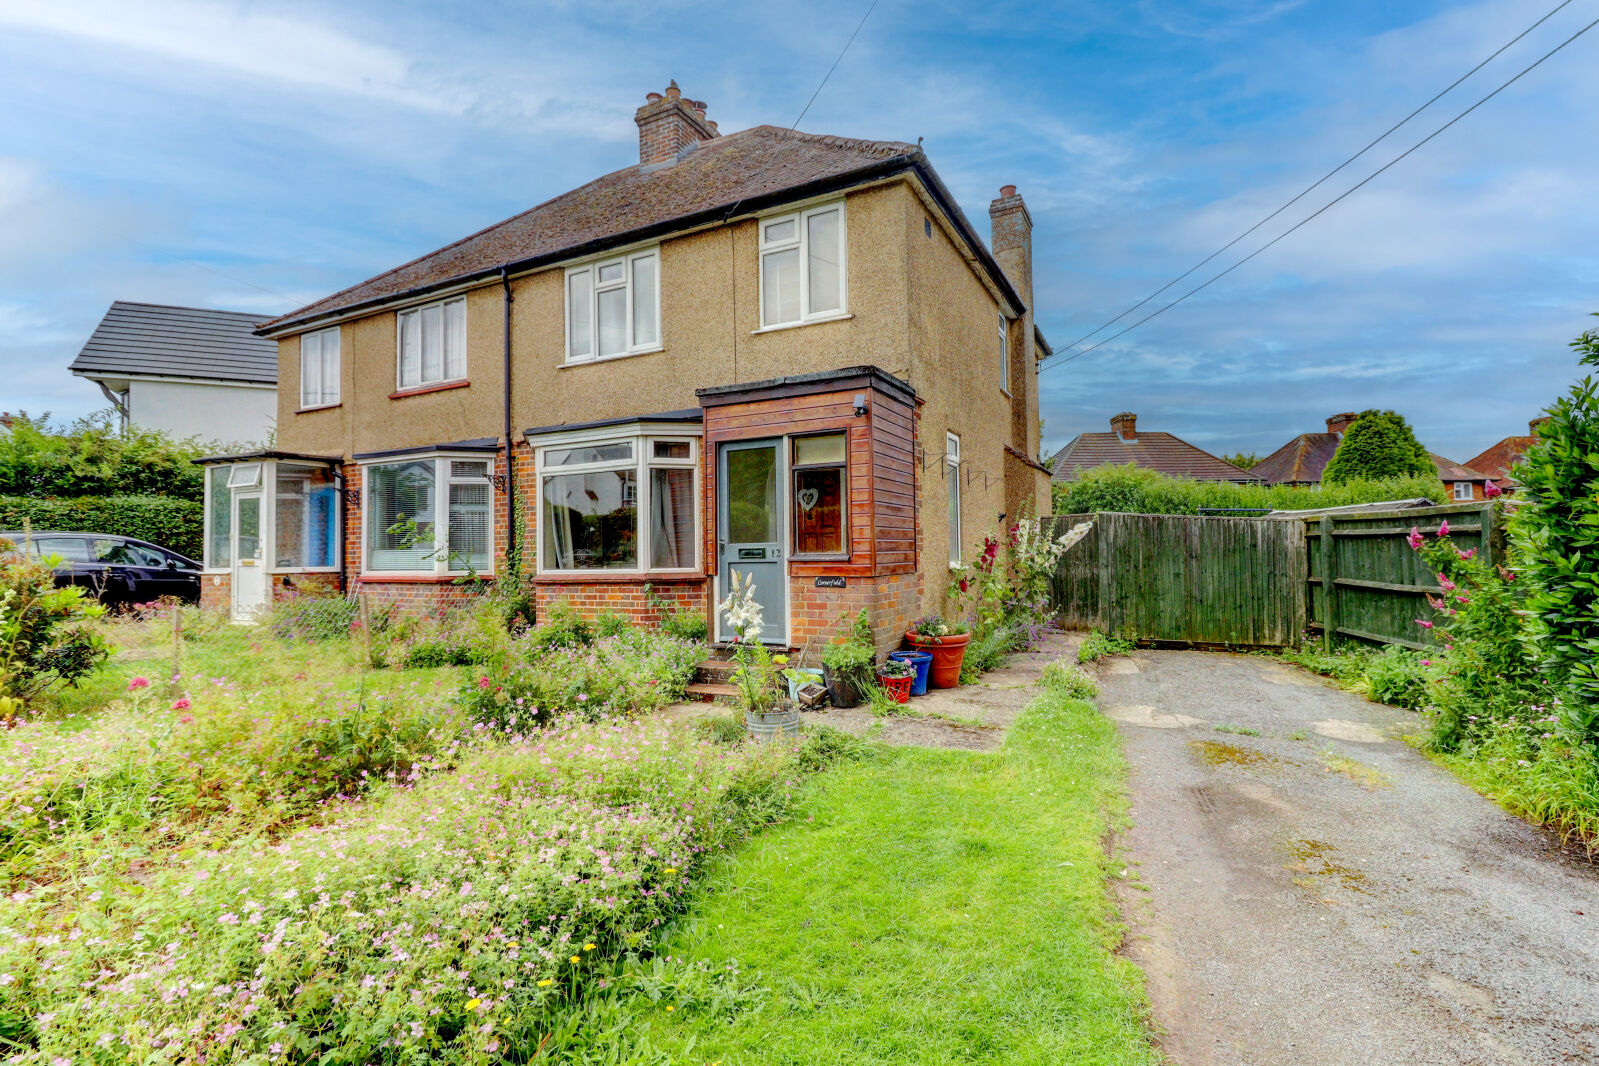 3 bedroom semi detached house for sale Plomer Green Lane, High Wycombe, HP13, main image